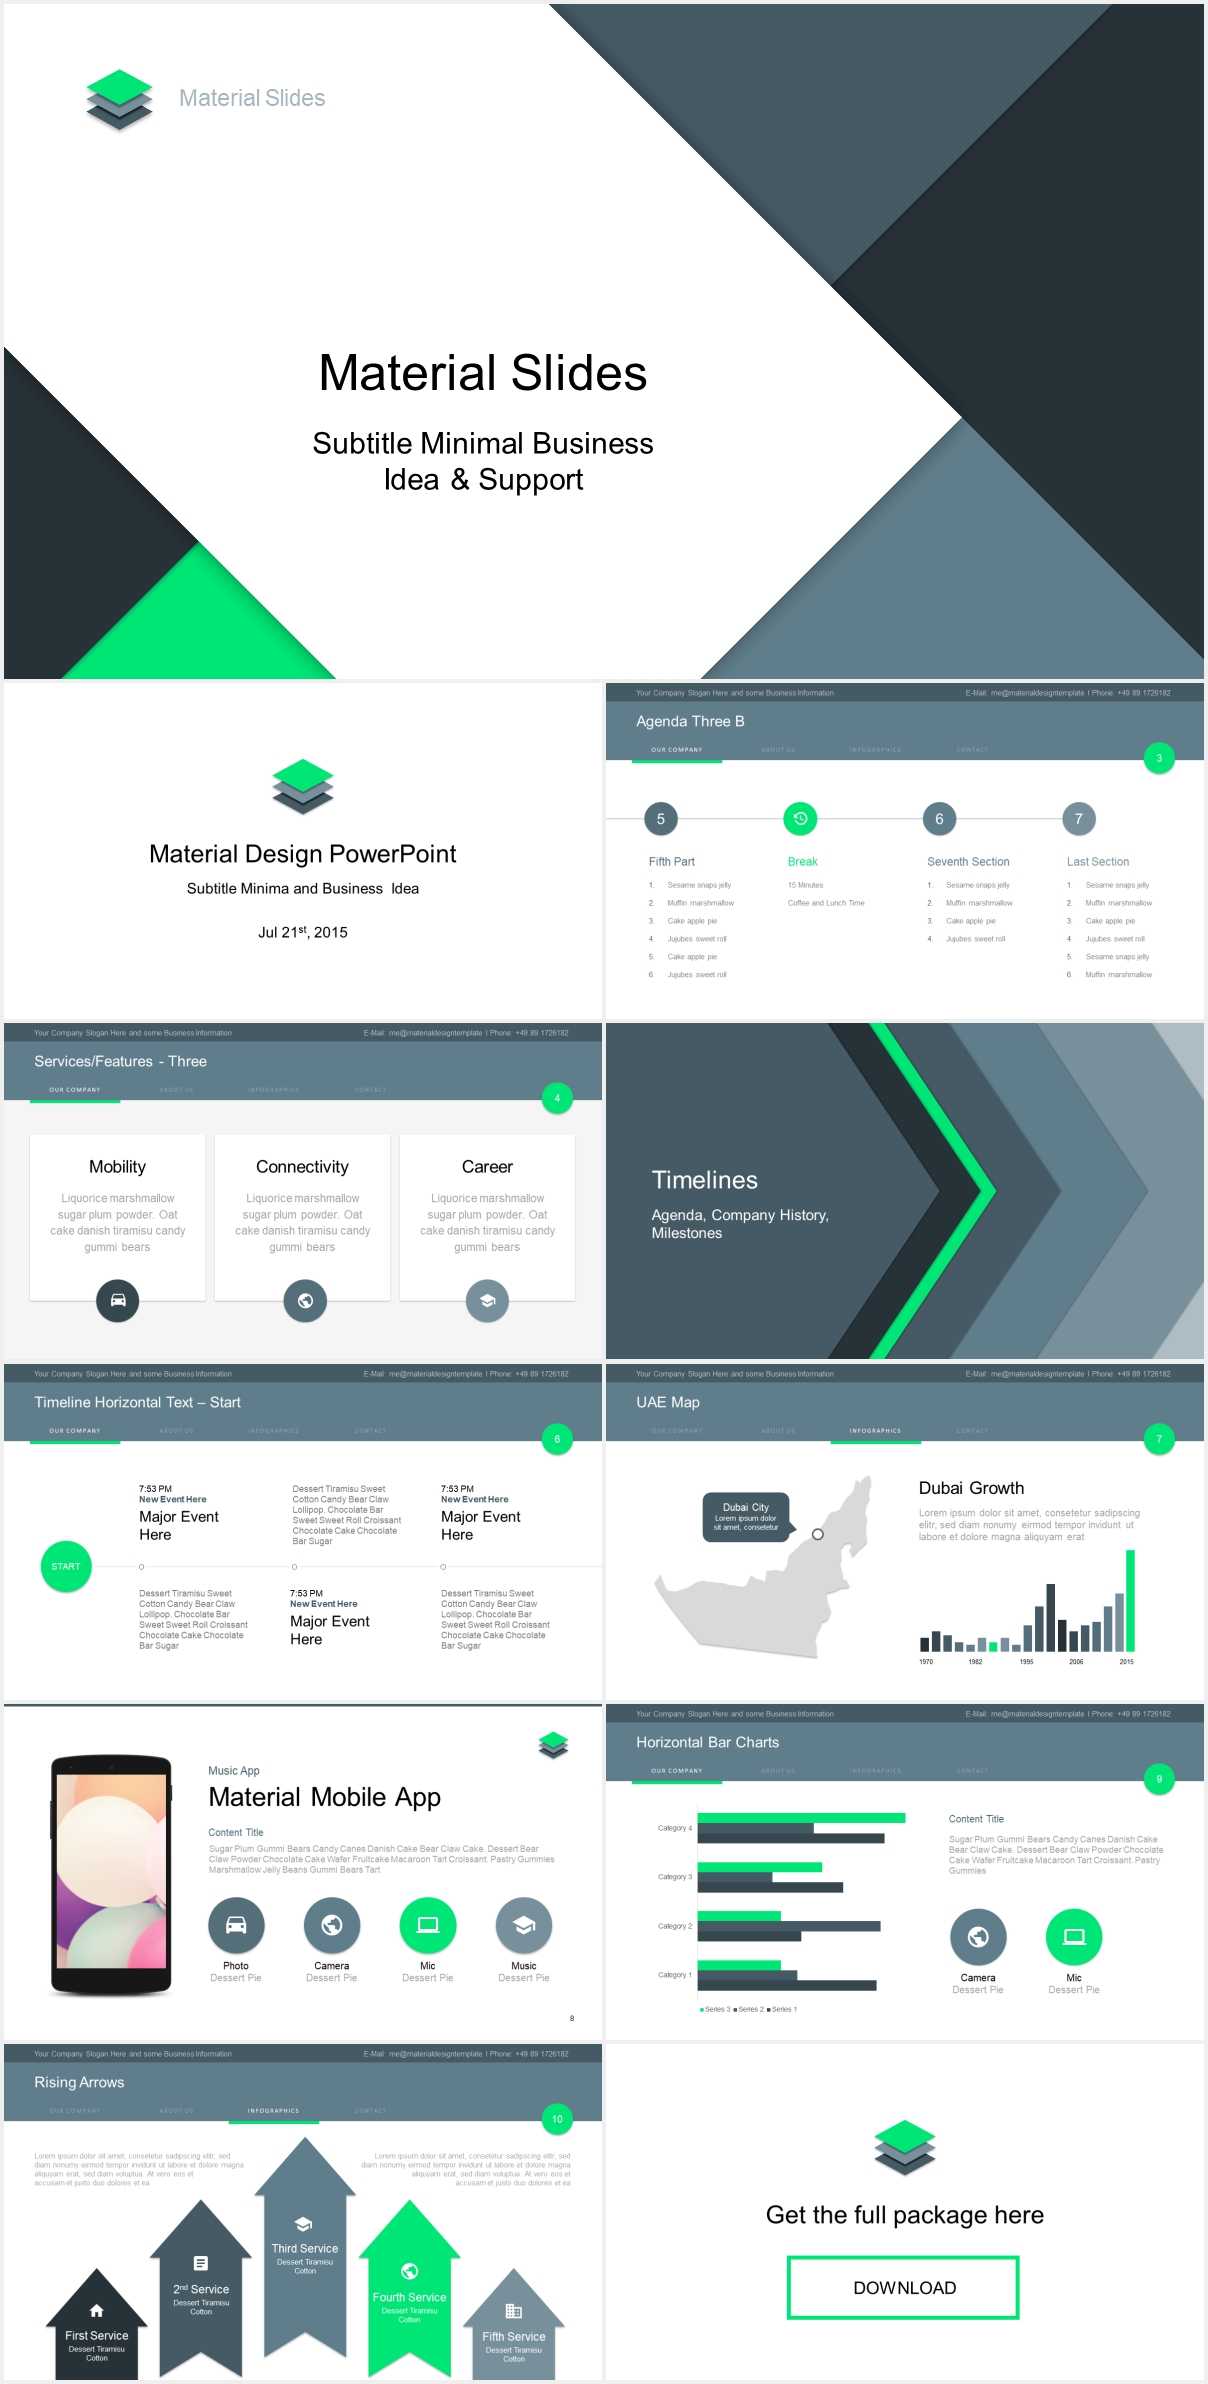 Material Design Powerpoint Template – Just Free Slides In Powerpoint Slides Design Templates For Free